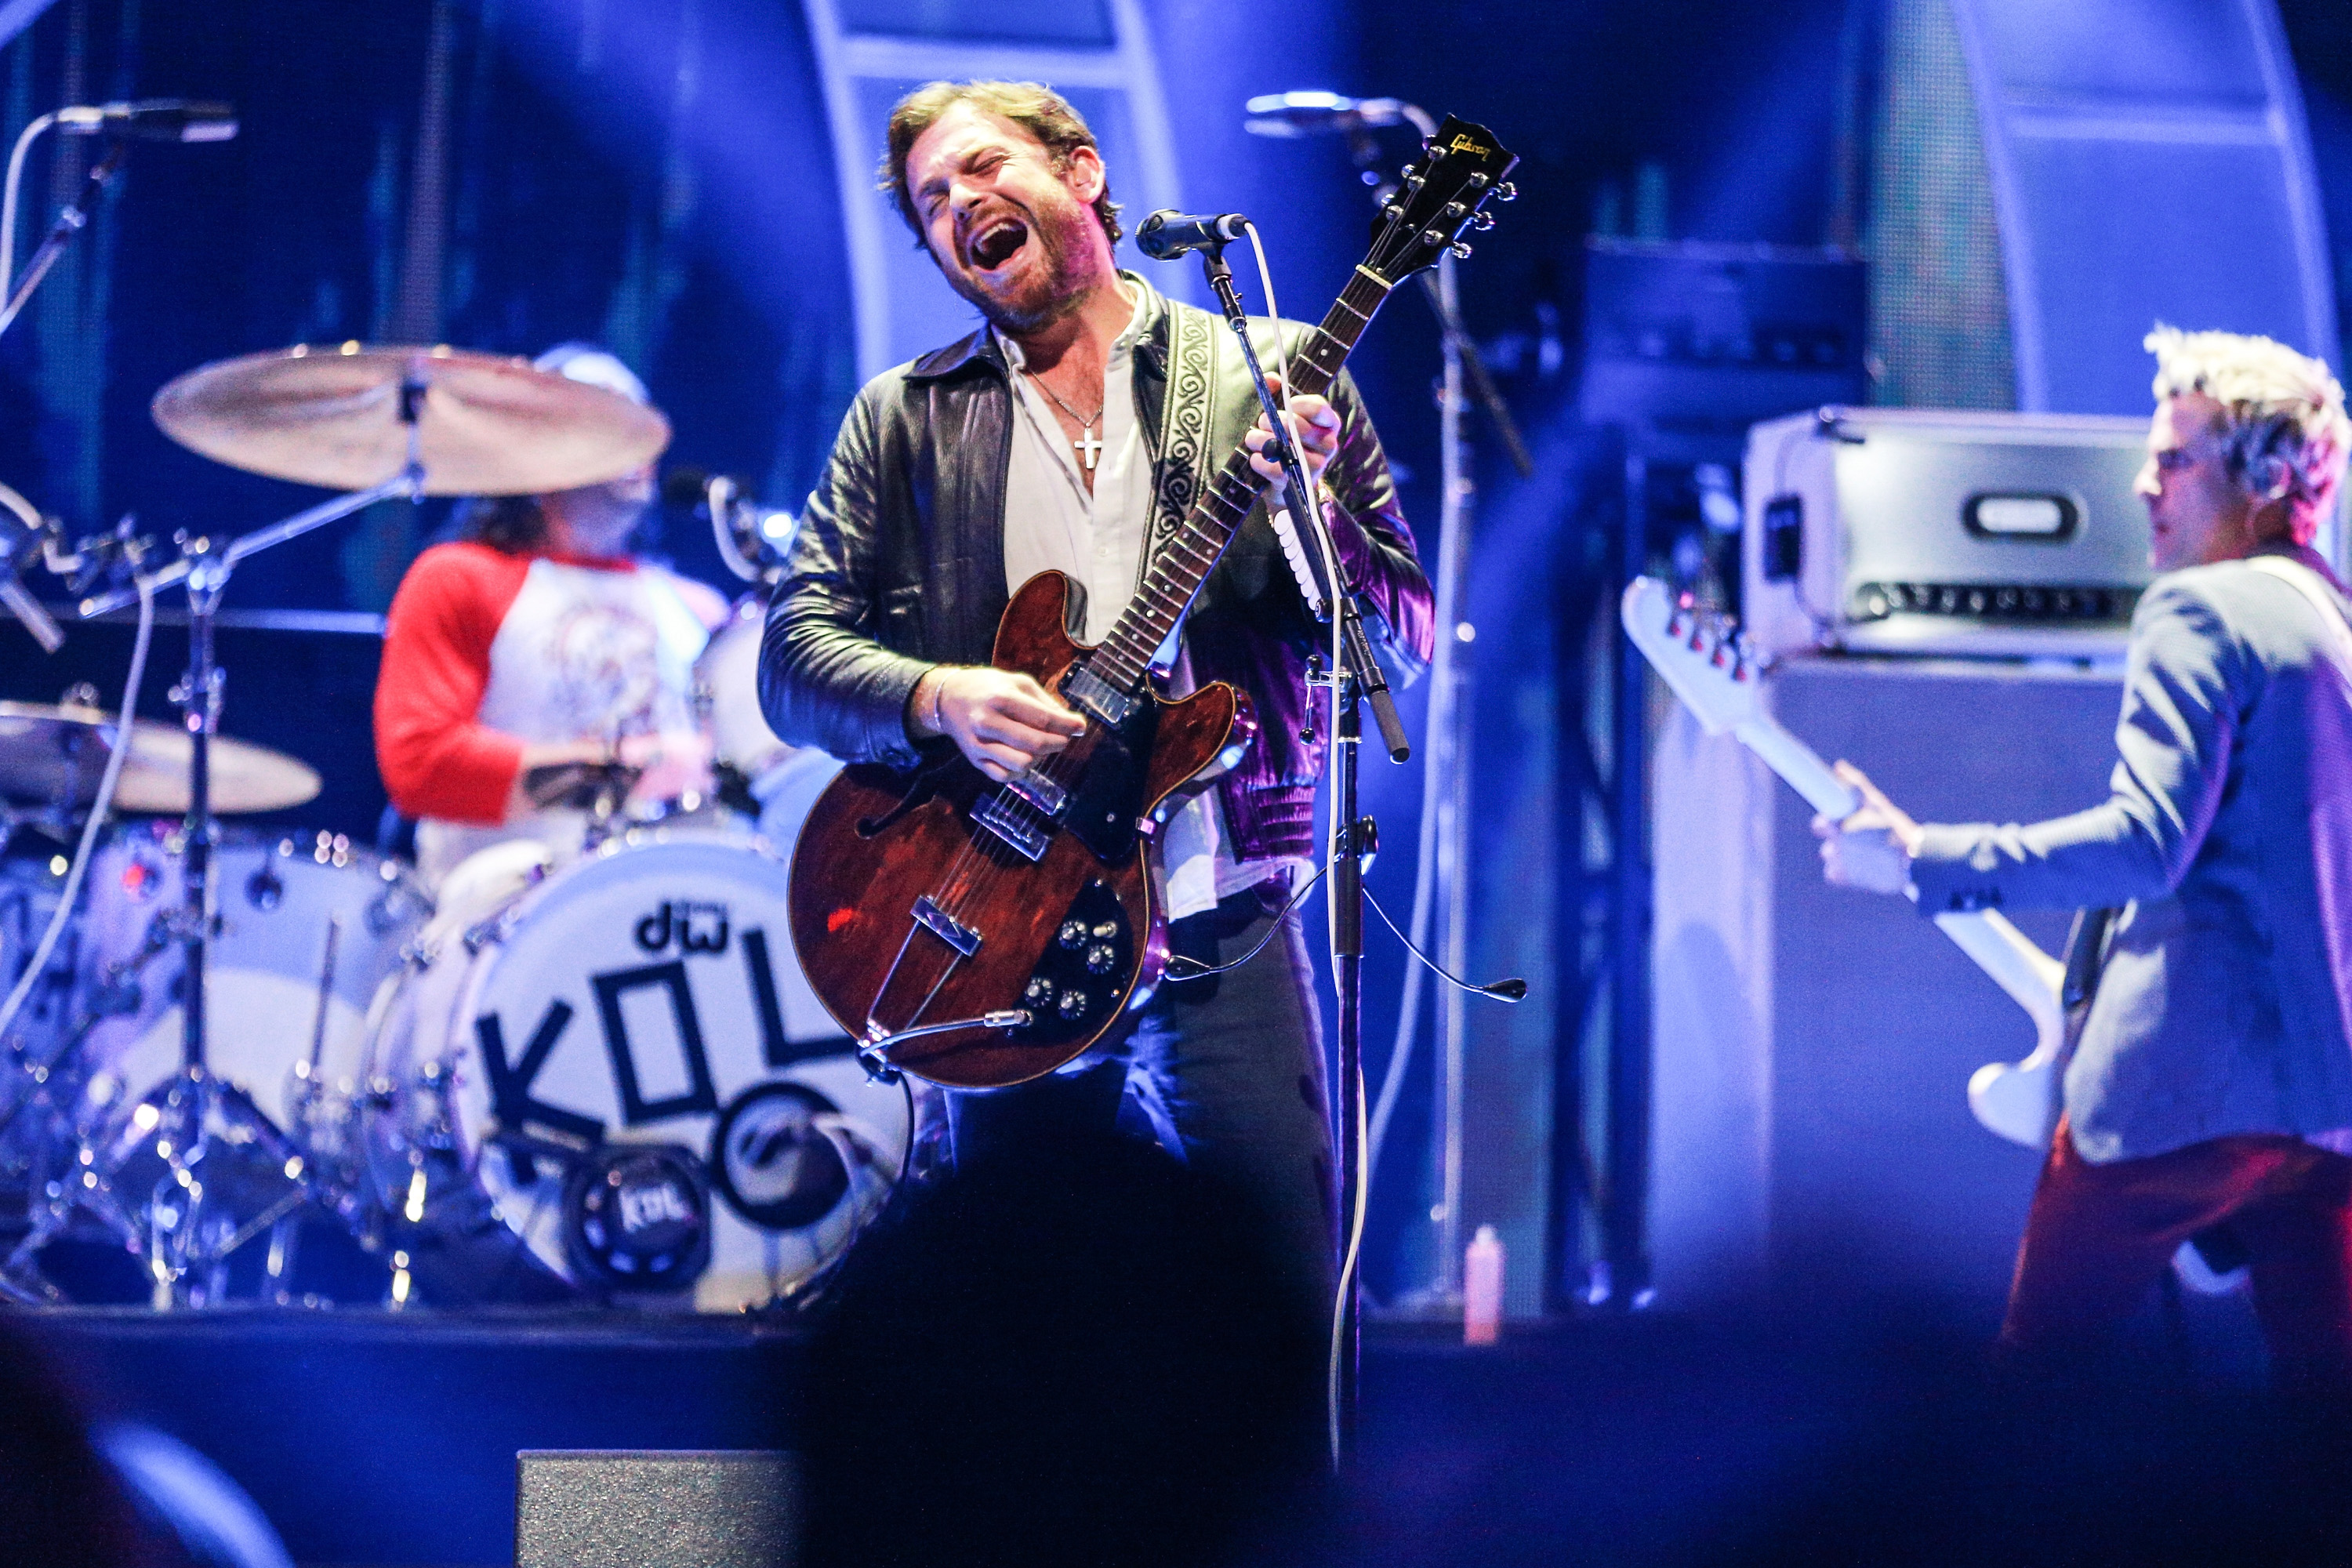 Caleb Followill of music group Kings of Leon performs onstage during the iHeartRadio Music Festival at T-Mobile Arena on September 23, 2017 in Las Vegas, Nevada.